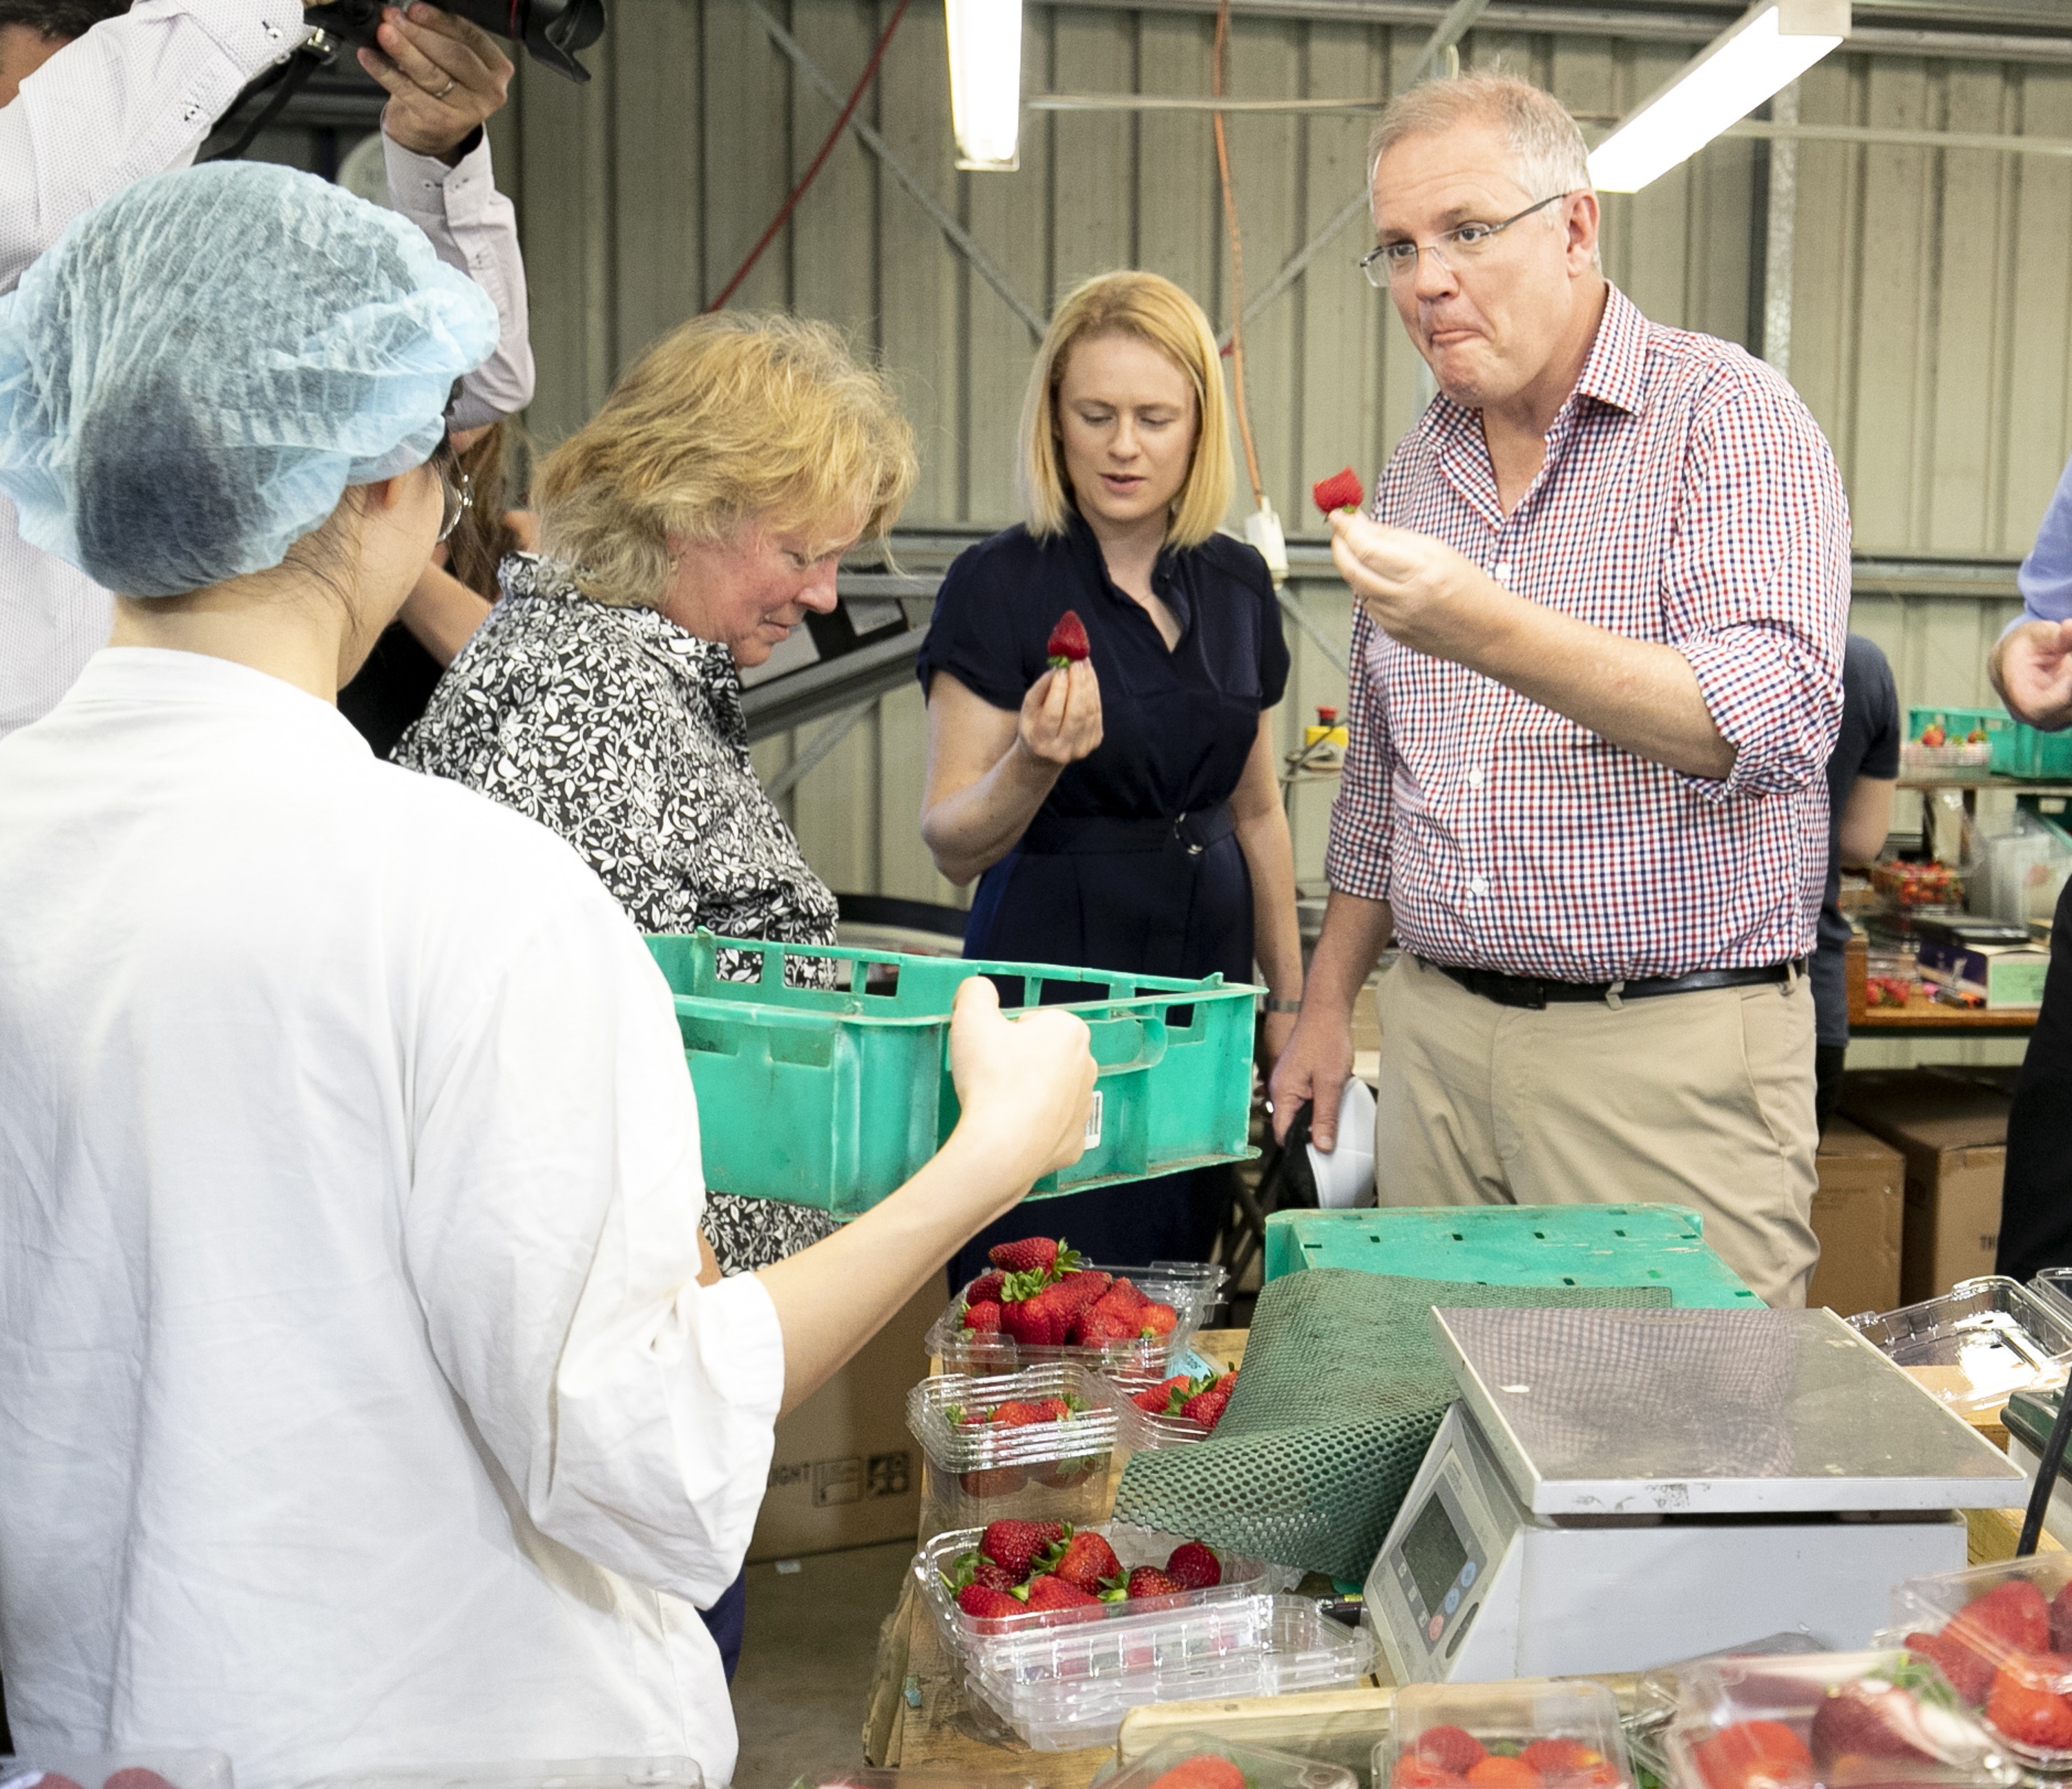 epa07142147 Australian Prime Minister Scott Morrison (R) samples fruit during a visit to a strawberry farm in Chambers Flat in southeast Queensland, Australia, 05 November 2018.  EPA/TIM MARSDEN  AUSTRALIA AND NEW ZEALAND OUT